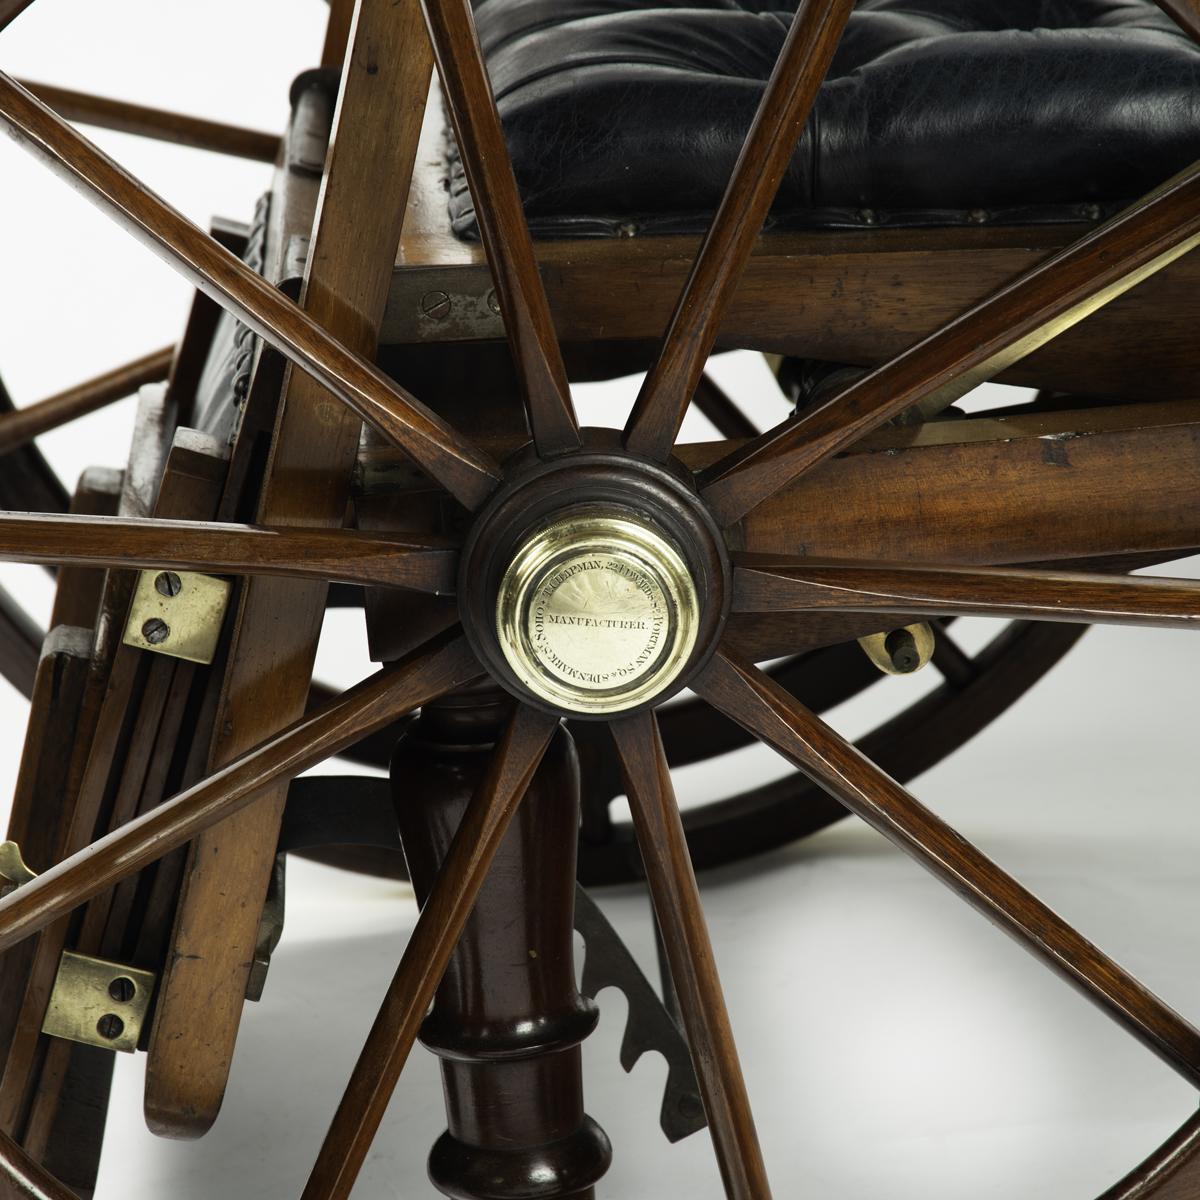 A patented mechanical campaign invalid chair by Chapman